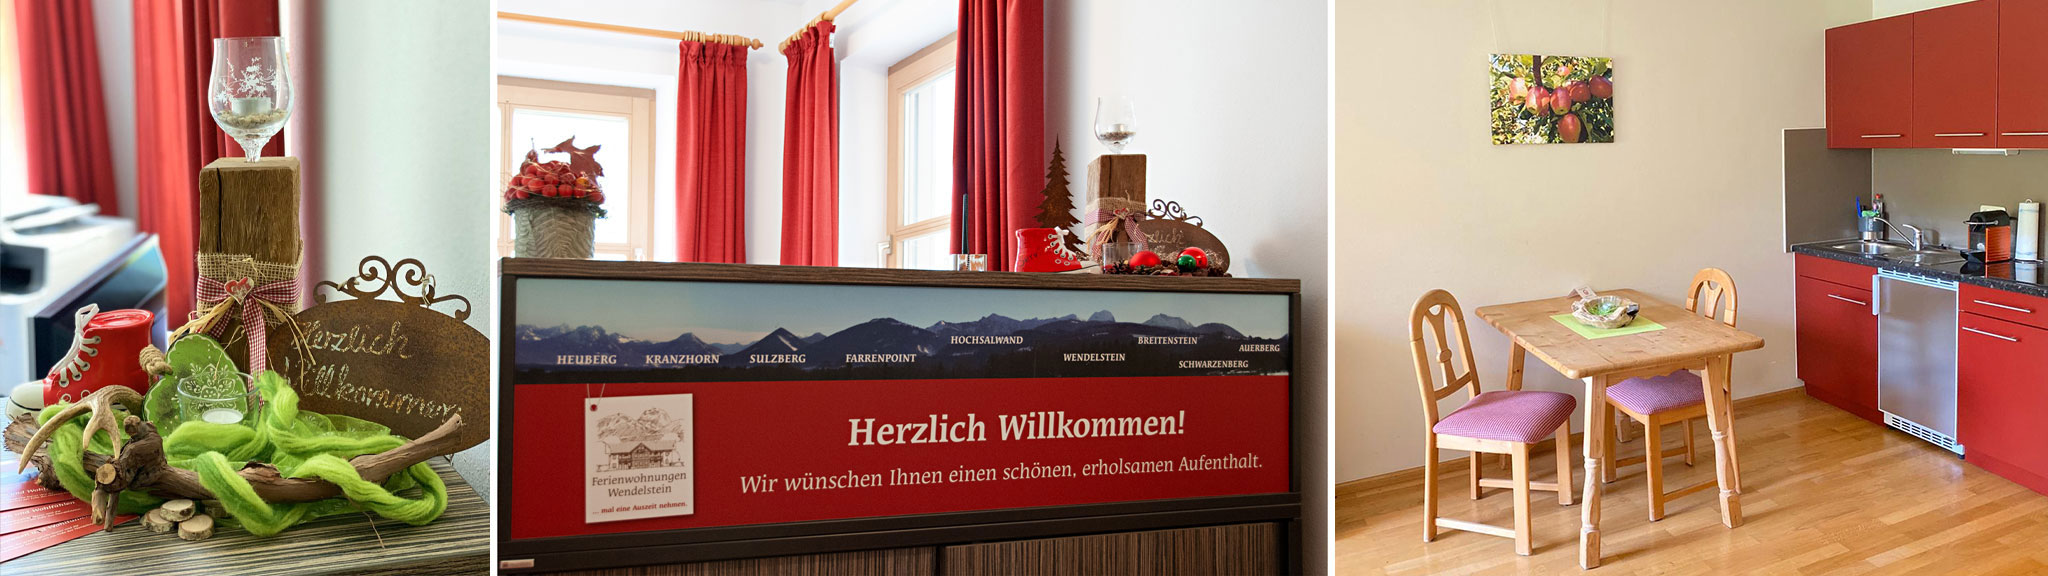 Reception area of the Wendelstein Holiday Apartments